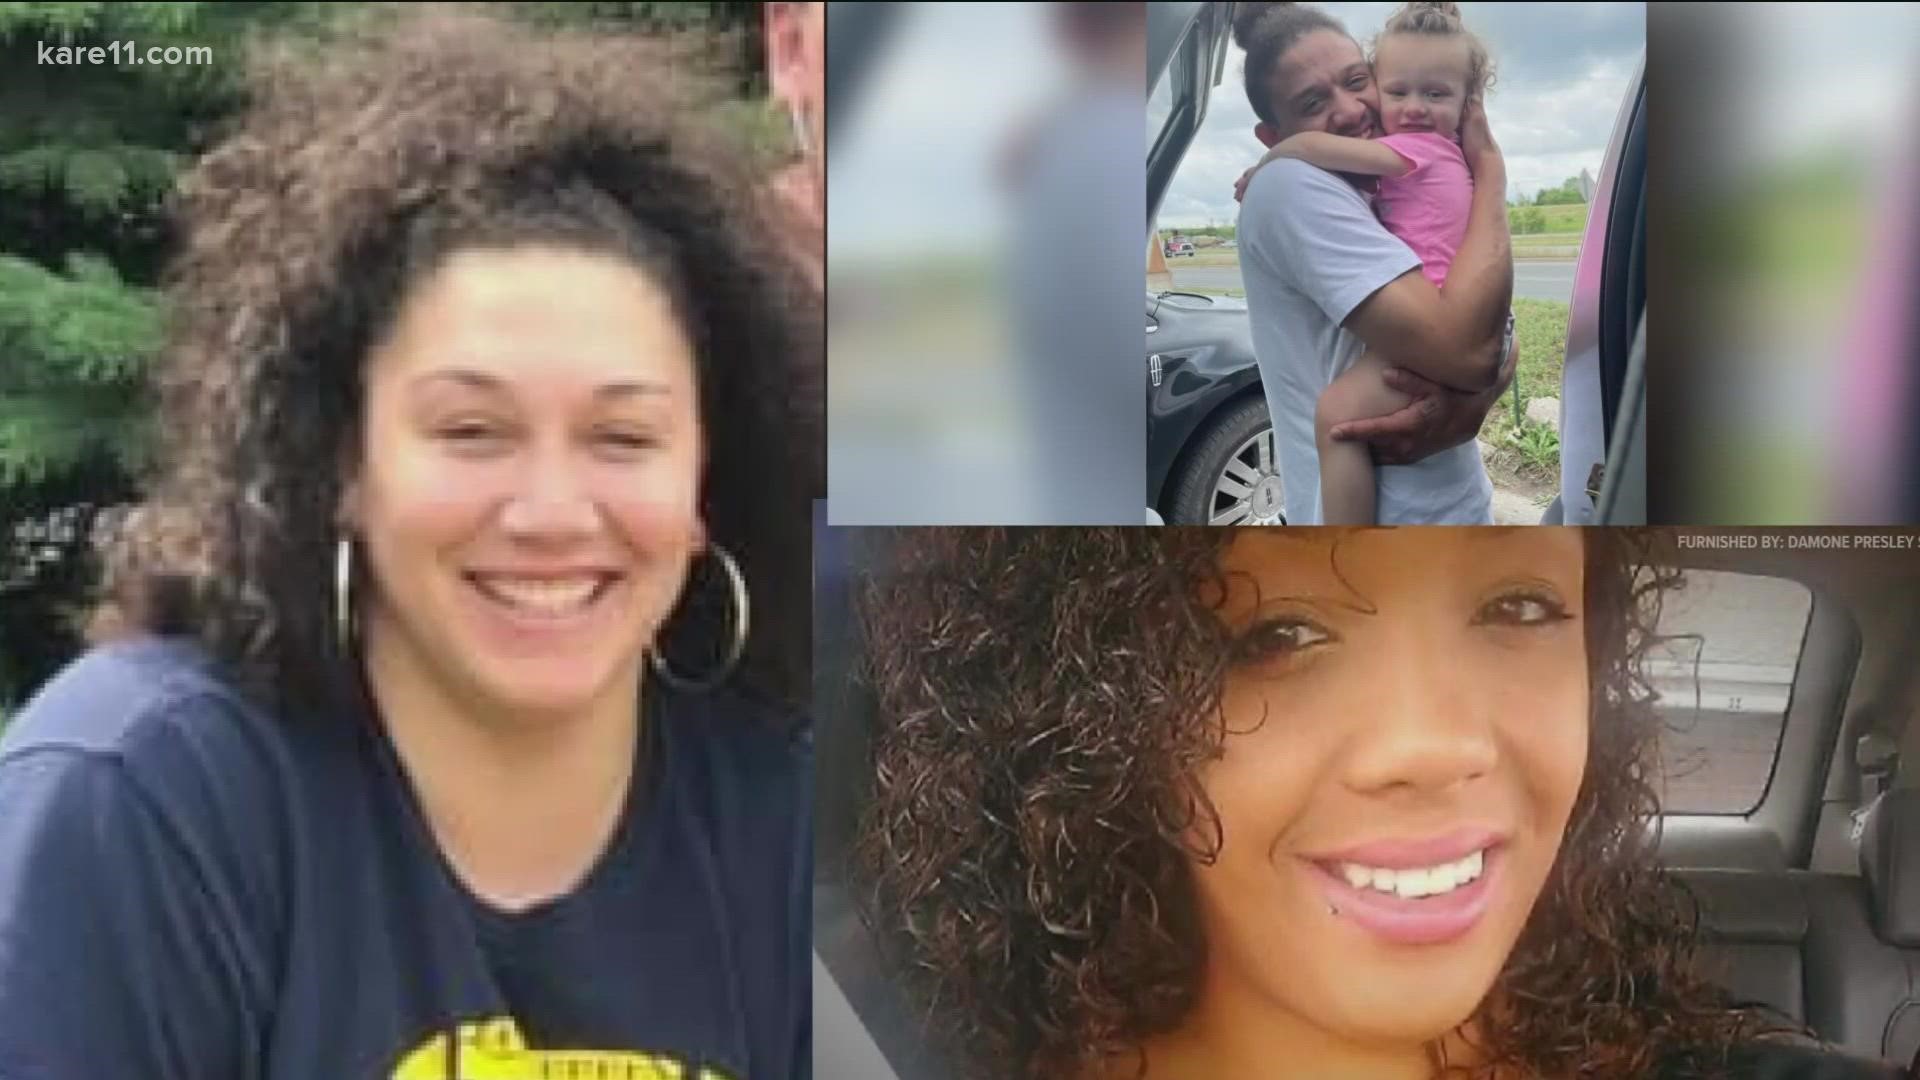 On Tuesday, the Ramsey County Medical Examiner's Office identified the victims, described by officials as close friends.